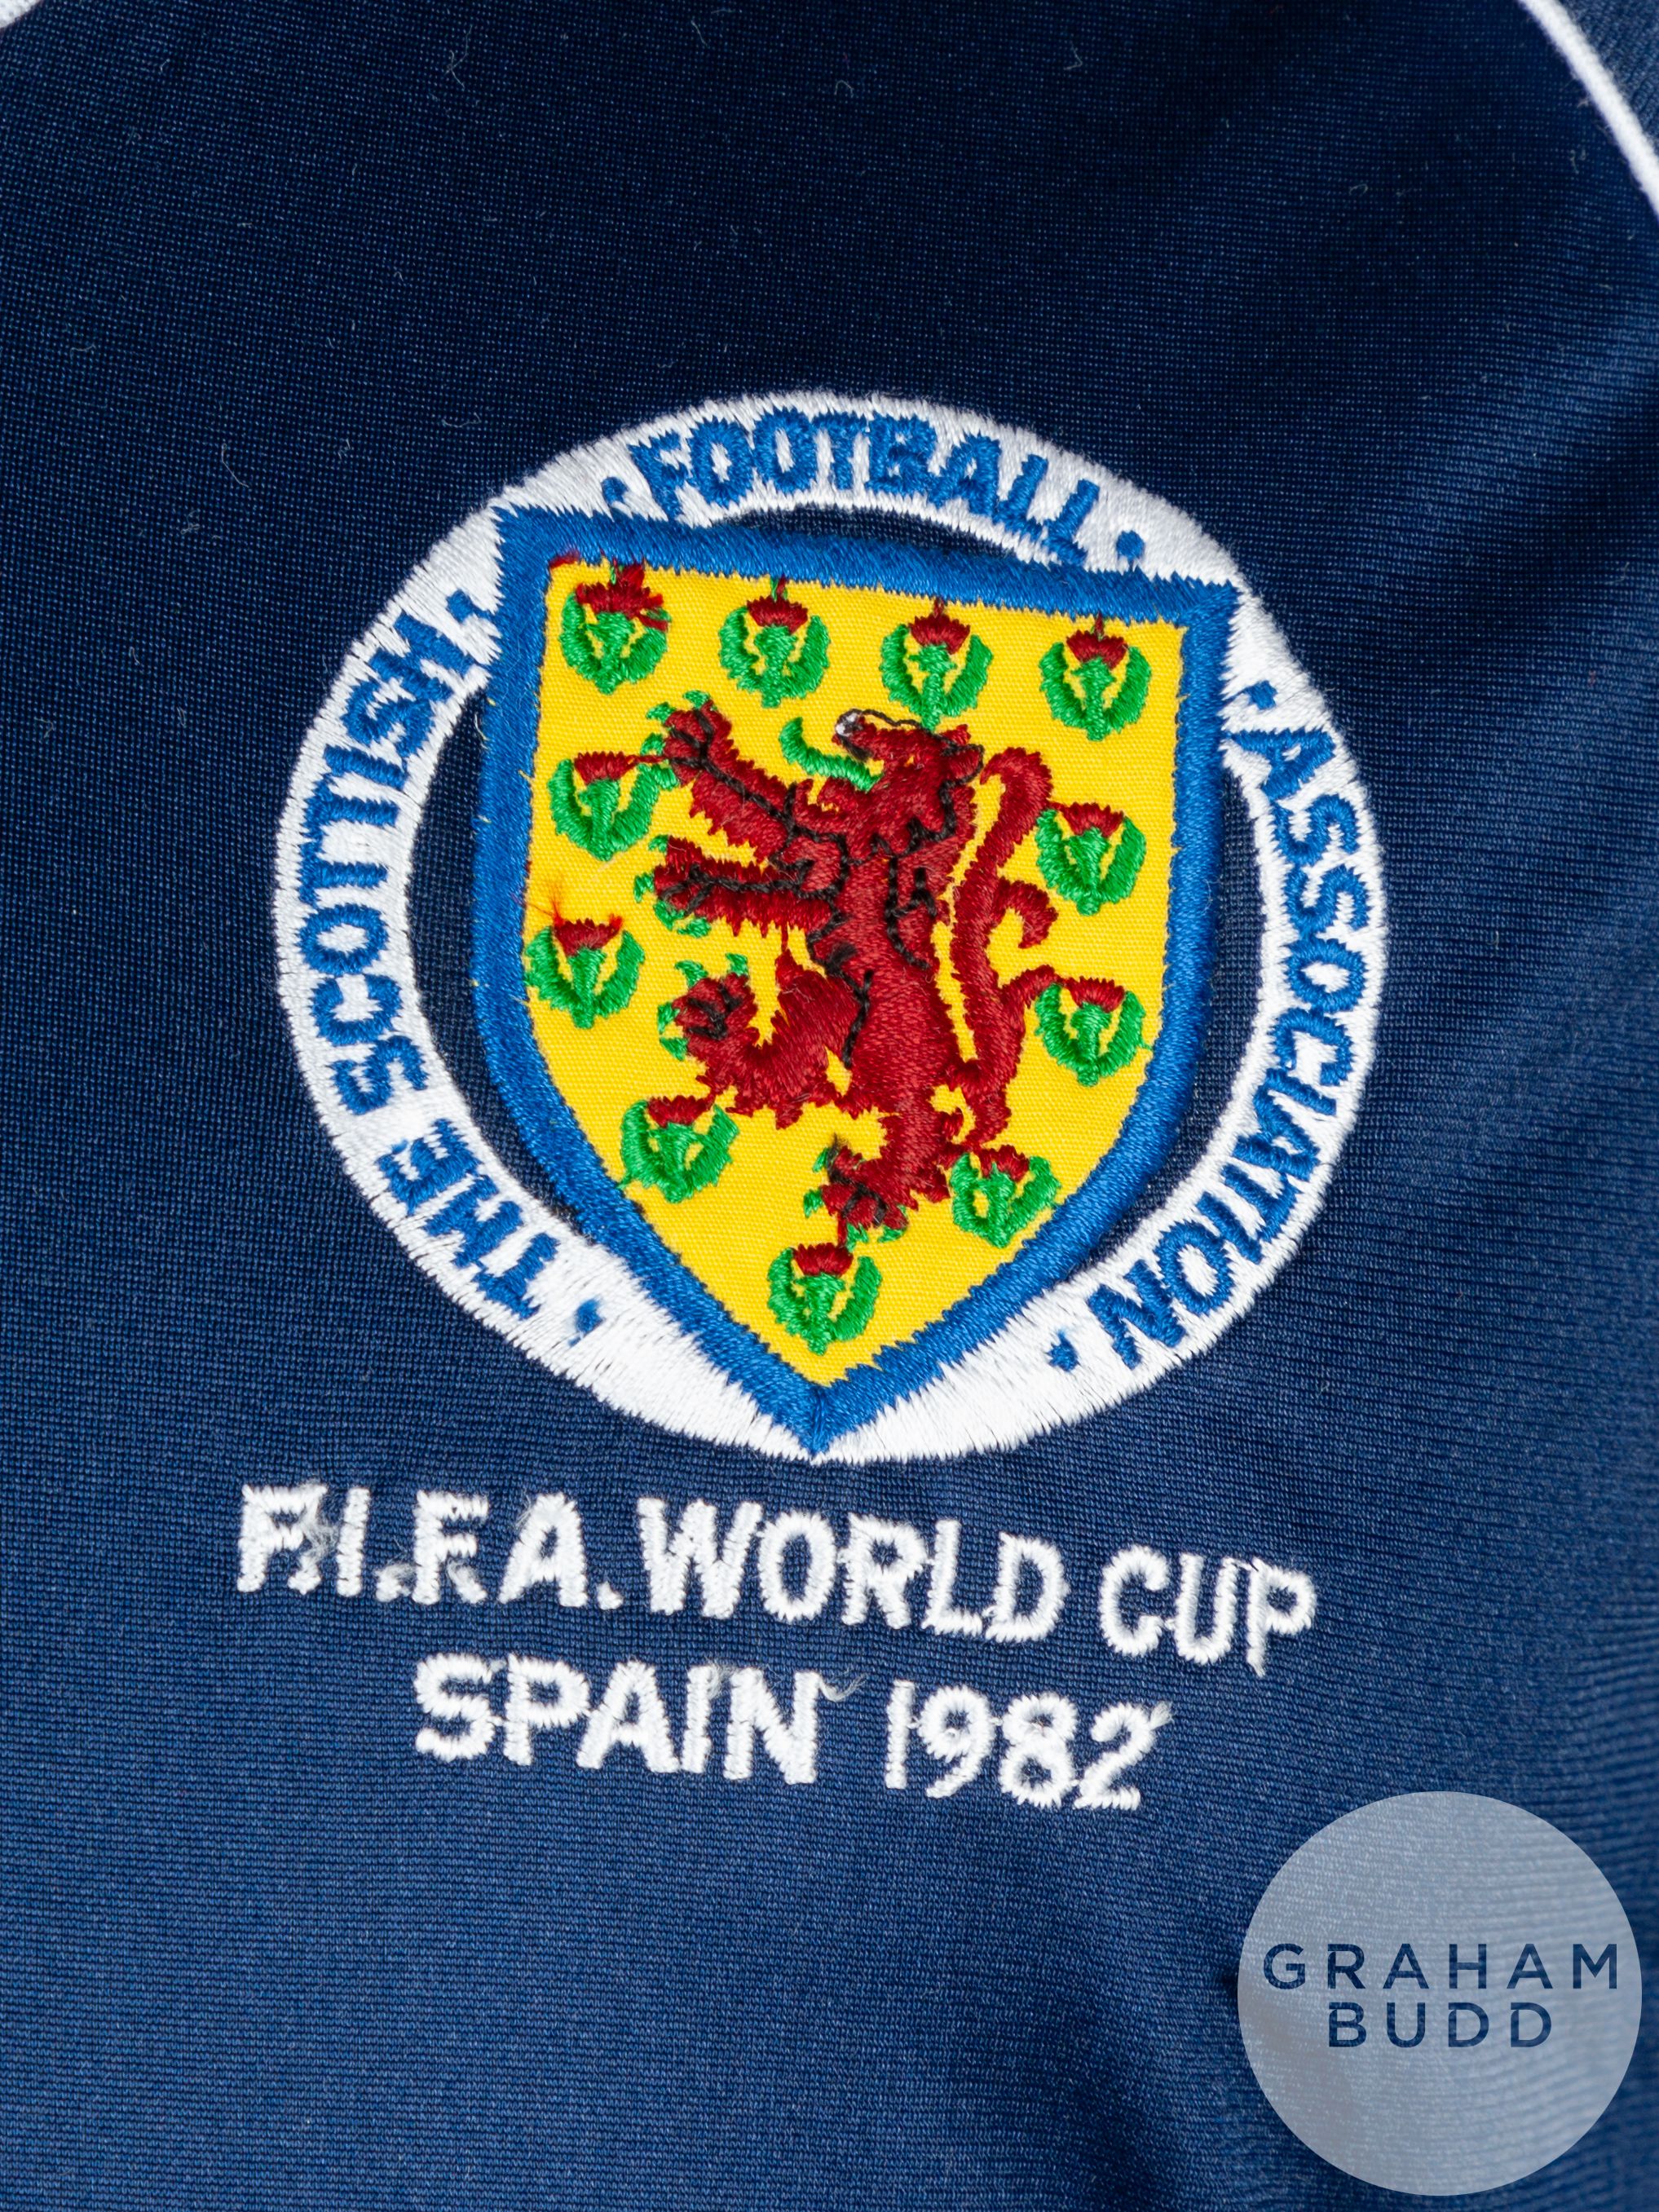 Alex McLeish blue and white No.13 Scotland World Cup short-sleeved shirt, 1982 - Image 3 of 4